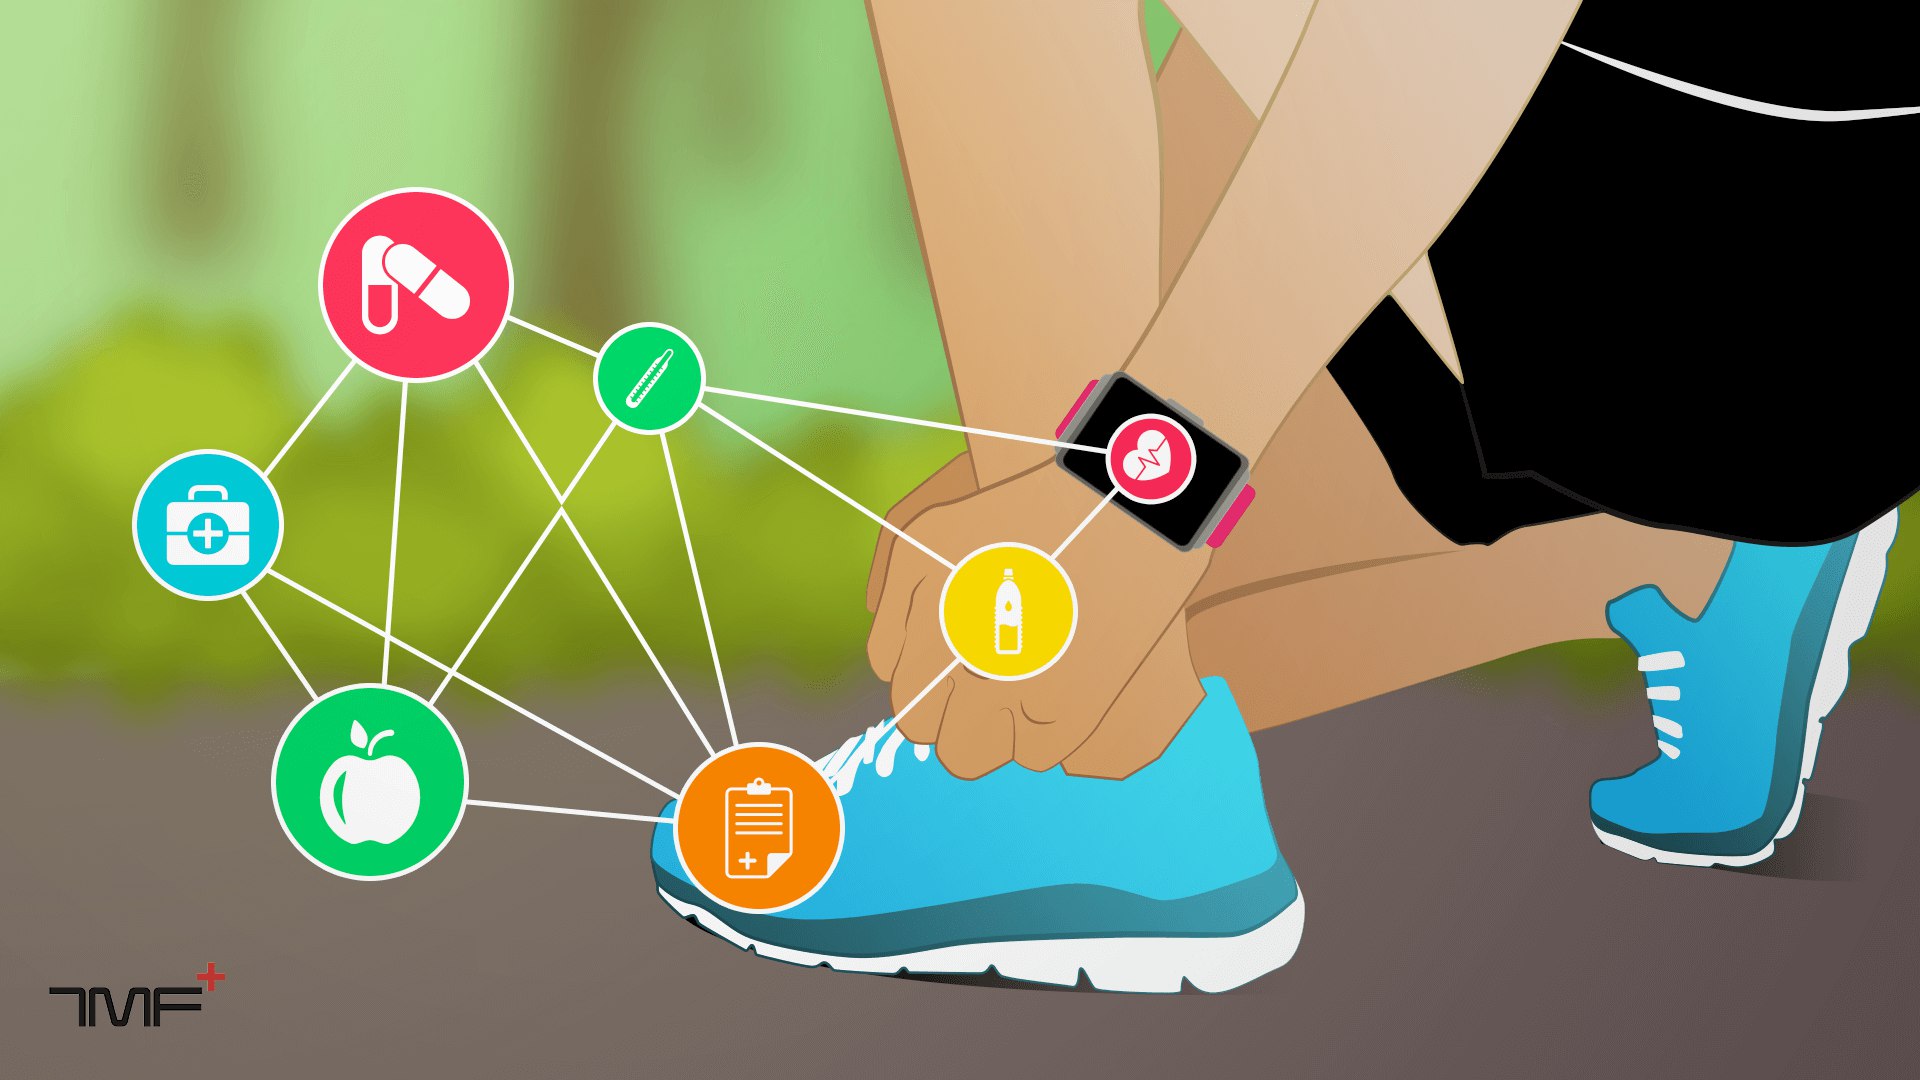 The Top Health Wearables For A Healthy Lifestyle Discover the Digital Healthcare Technology Trends, Products and Health IT News